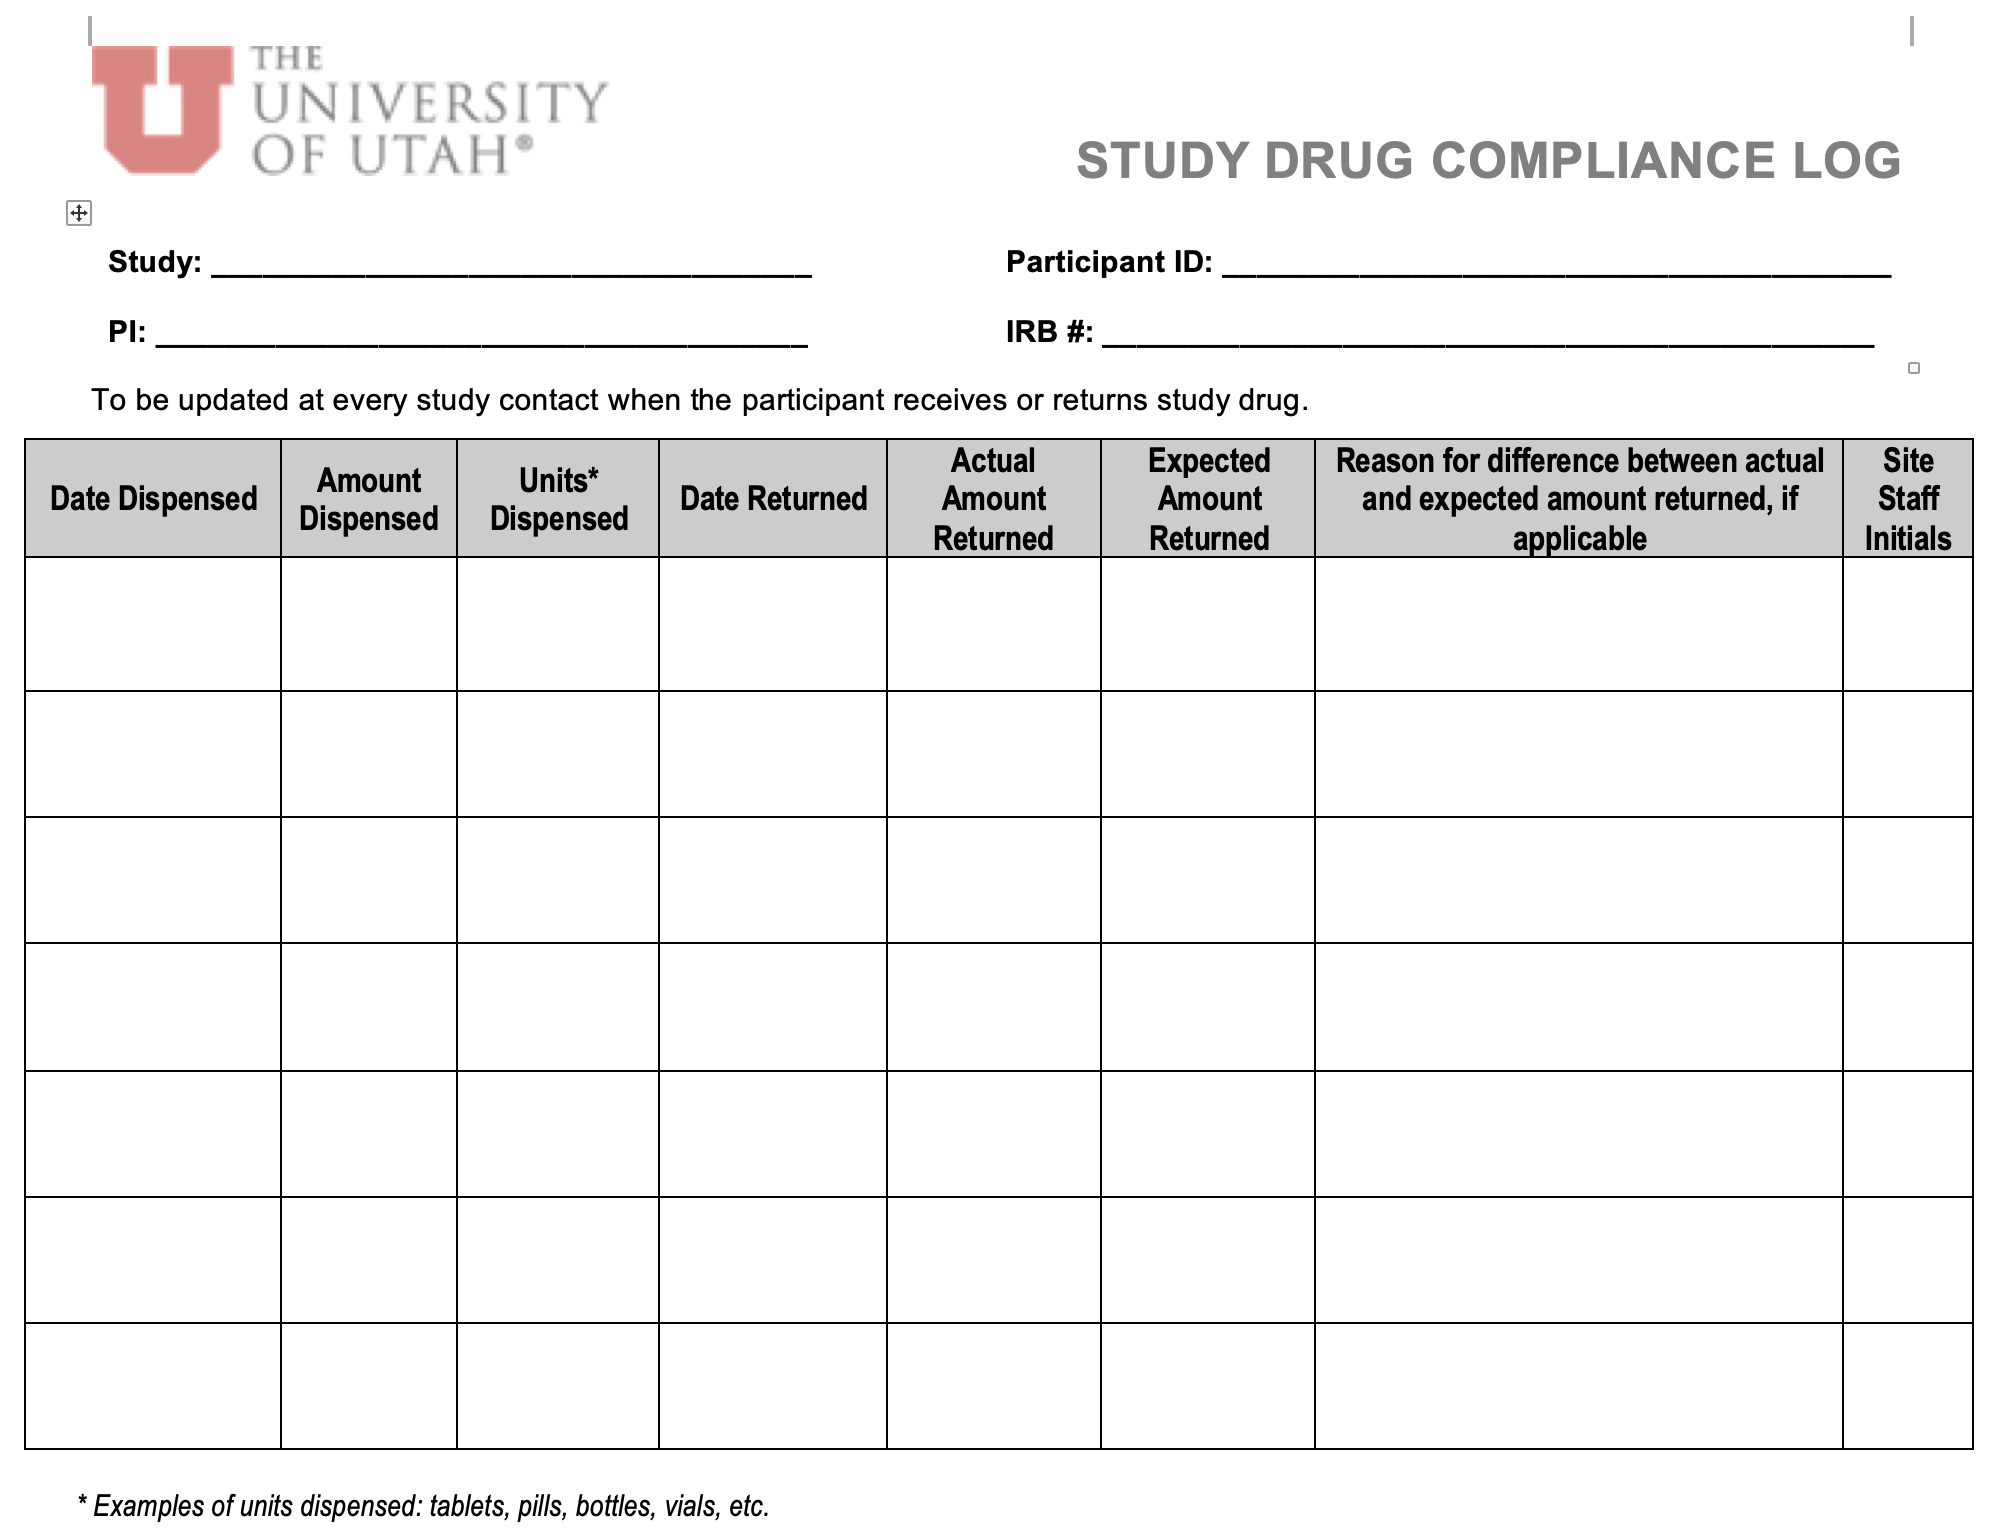 Tool Kit Research Quality and Compliance The University of Utah